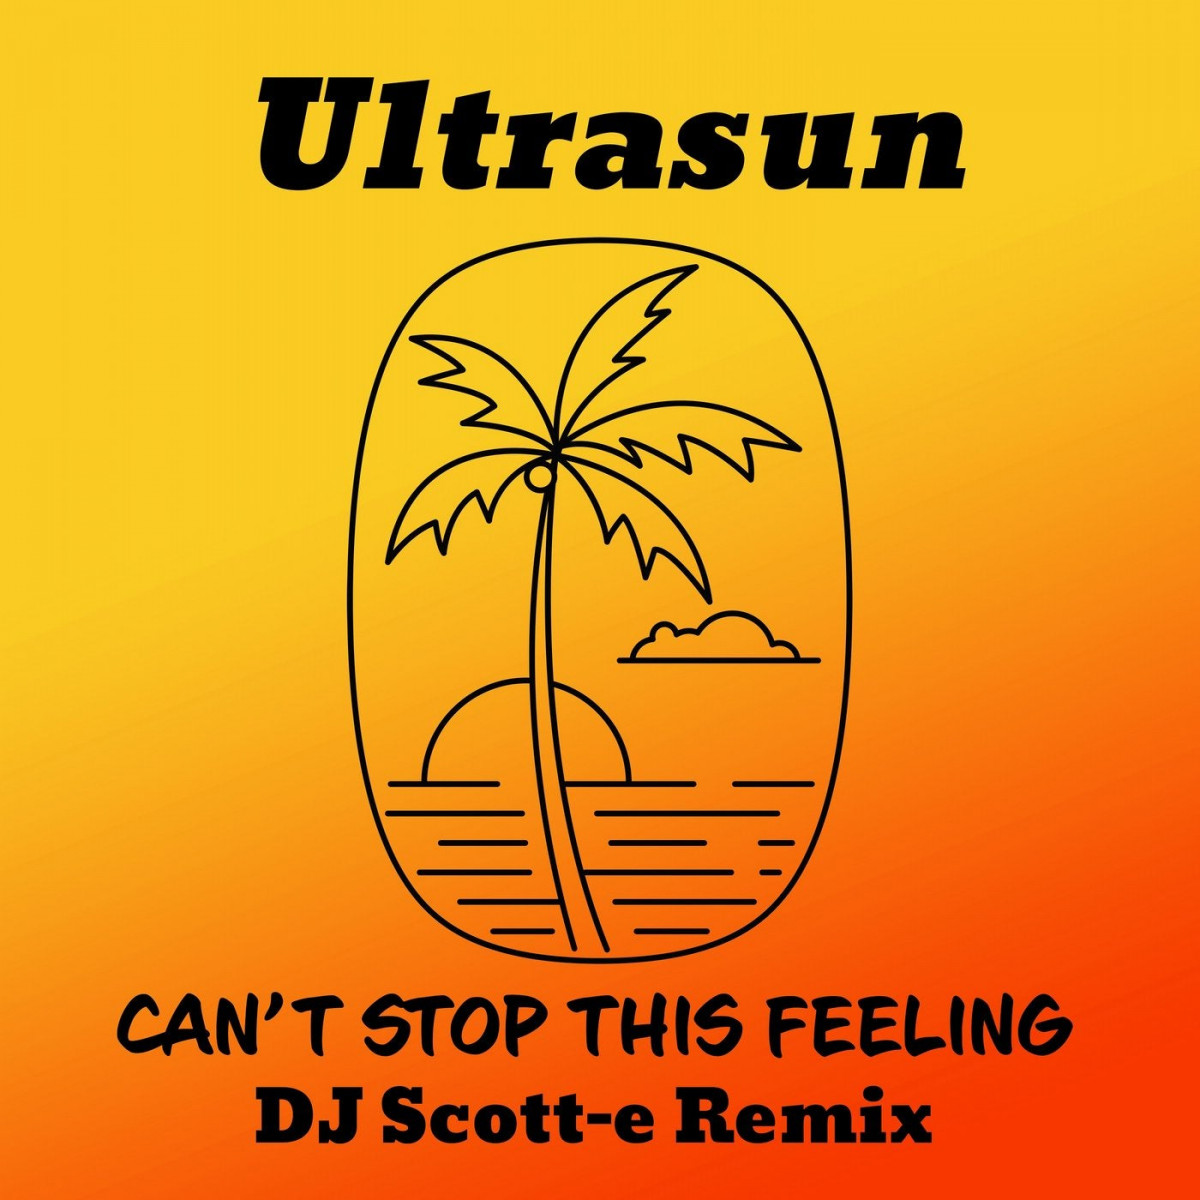 Ultrasun - Can't Stop This Feeling (2004)